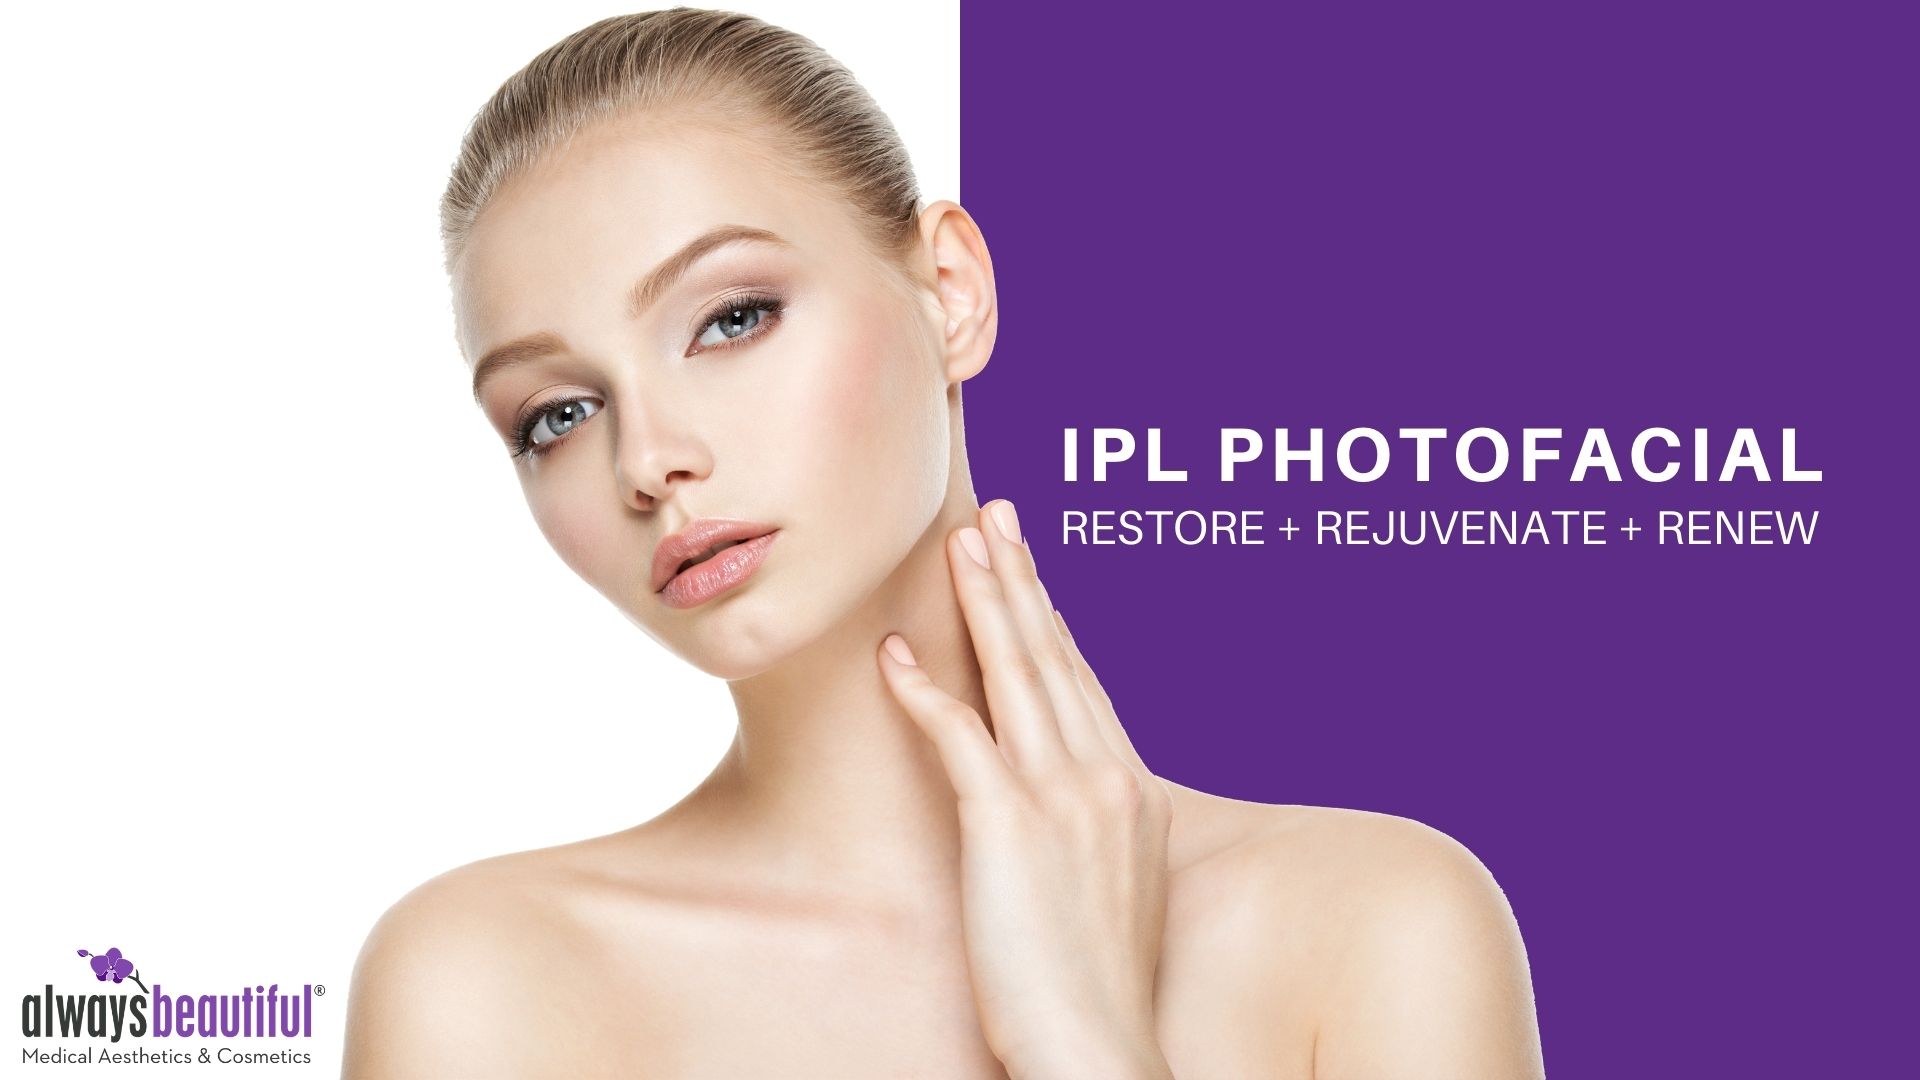 Woman with restored and rejuvenated complexion after IPL photofacial treatment at Always Beautiful.